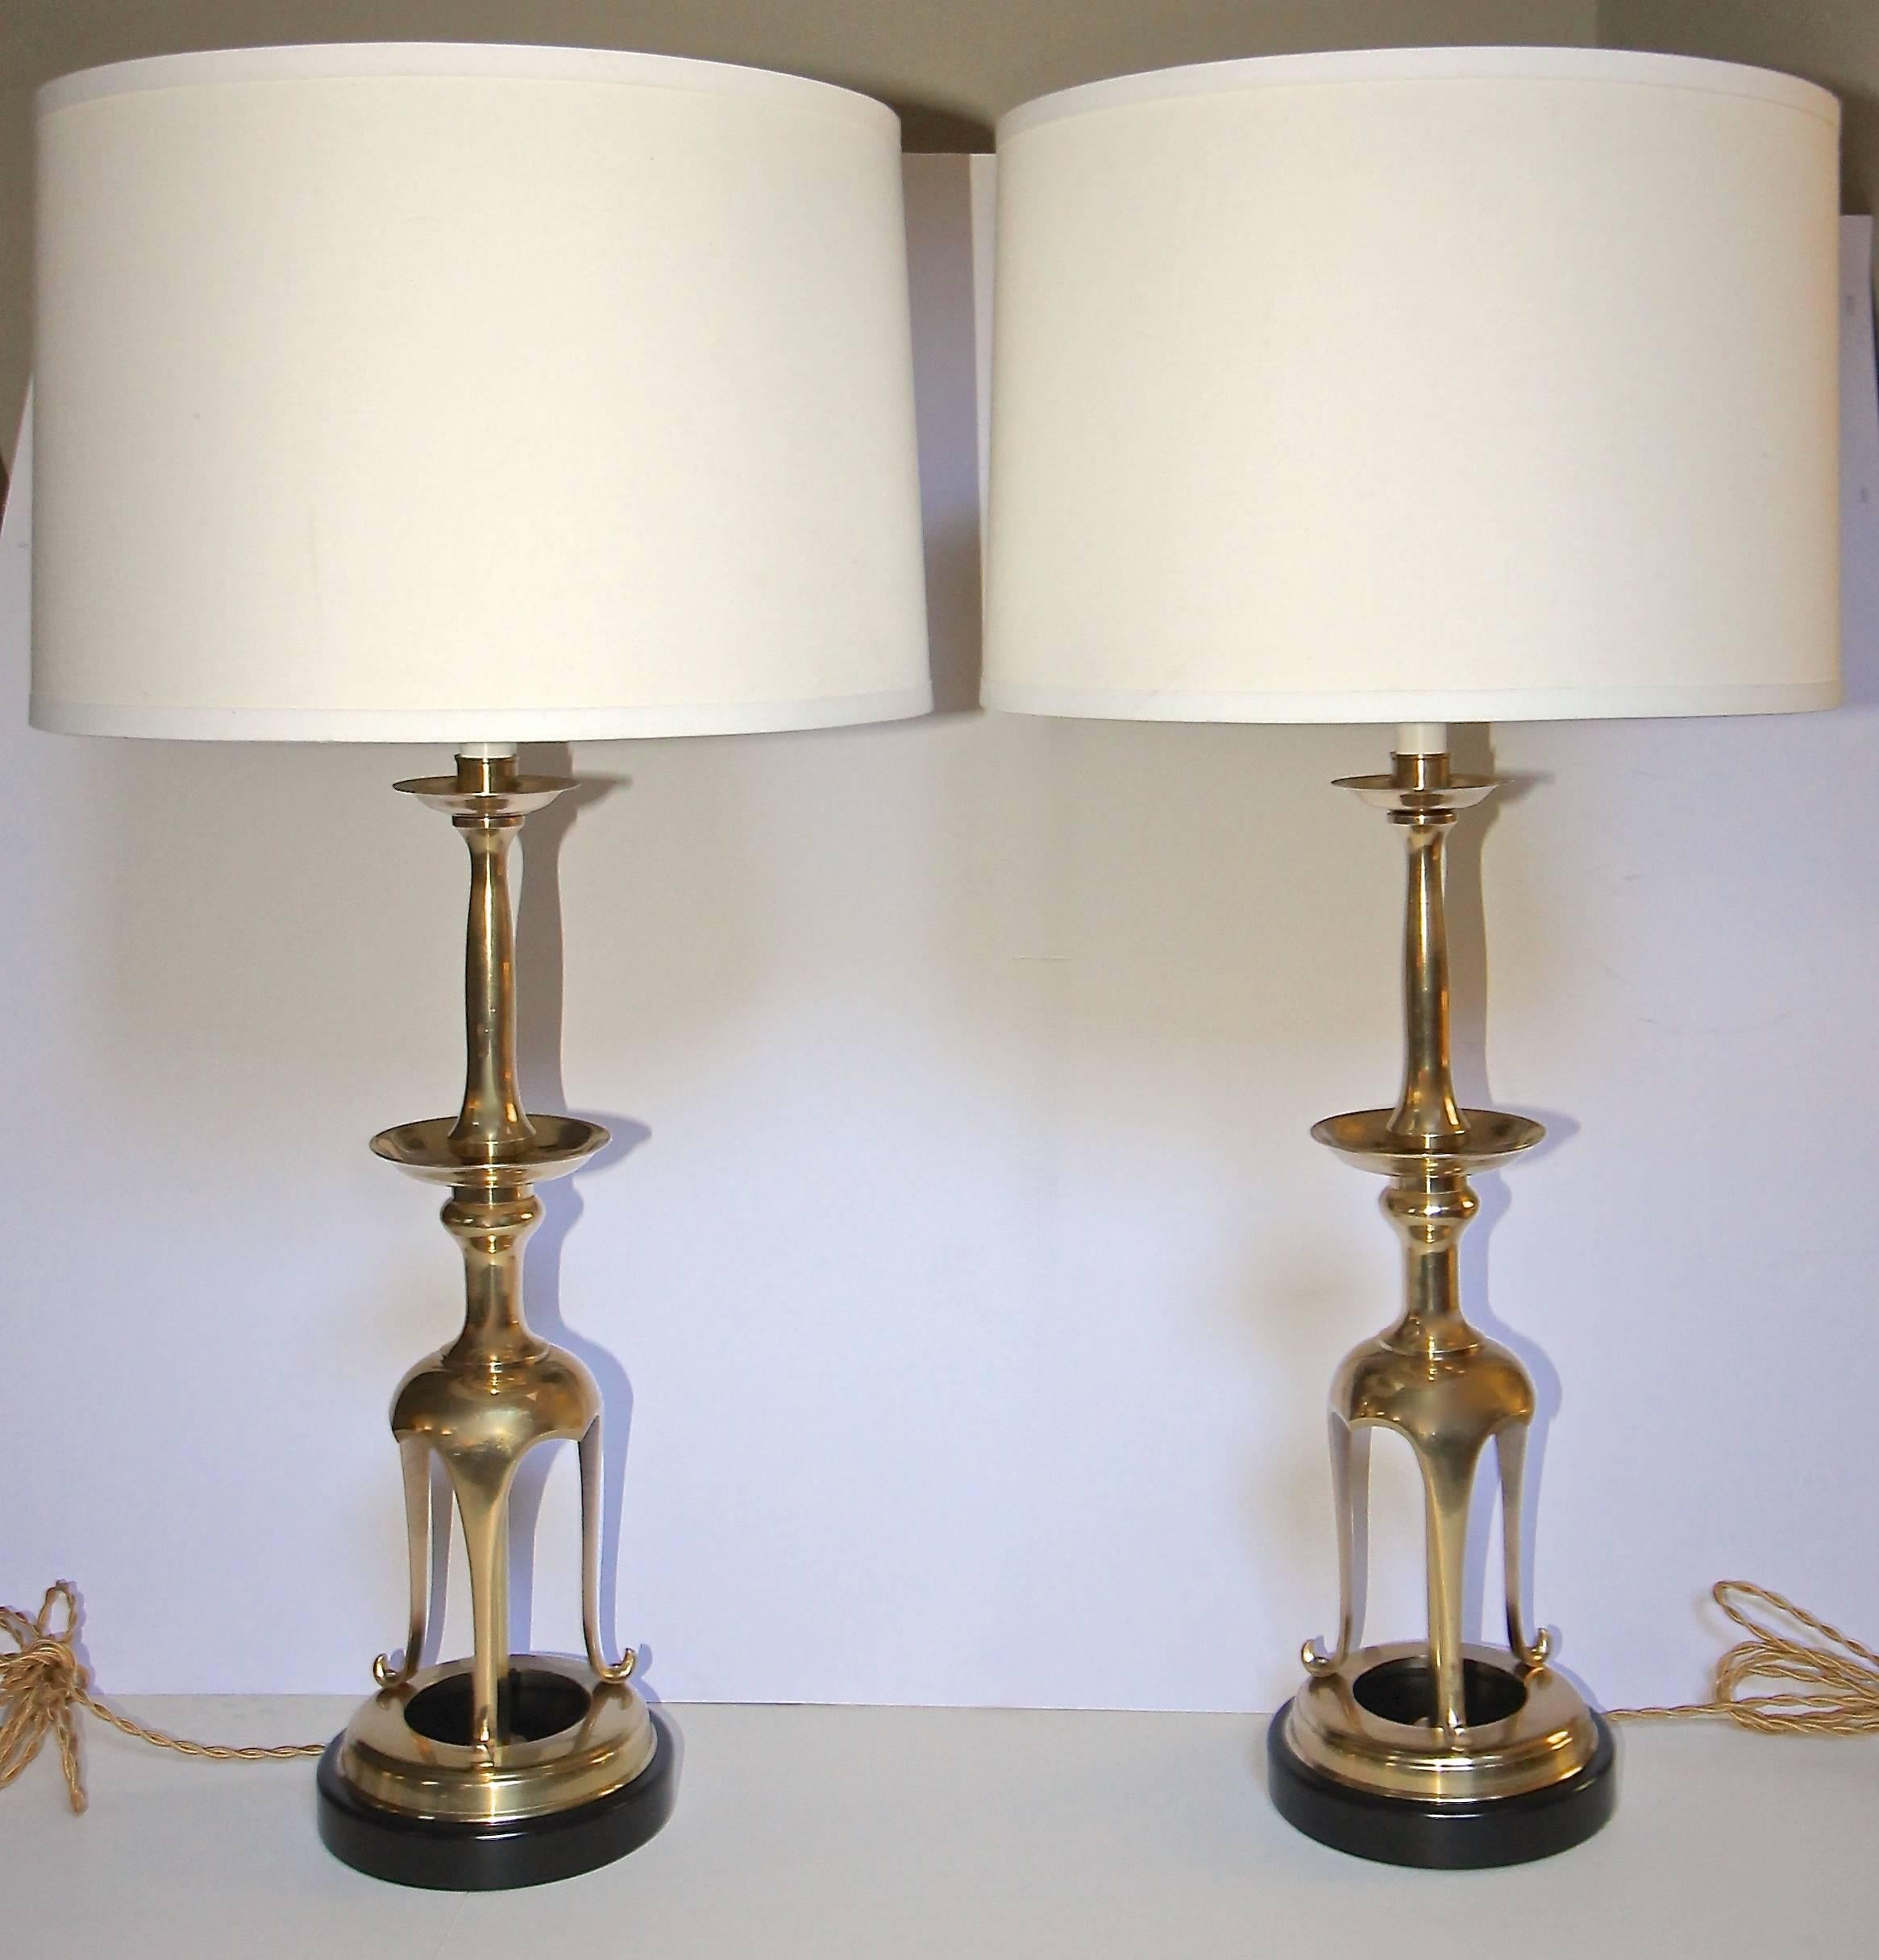 Painted Pair of Tall Brass Japanese Asian Candlestick Table Lamps